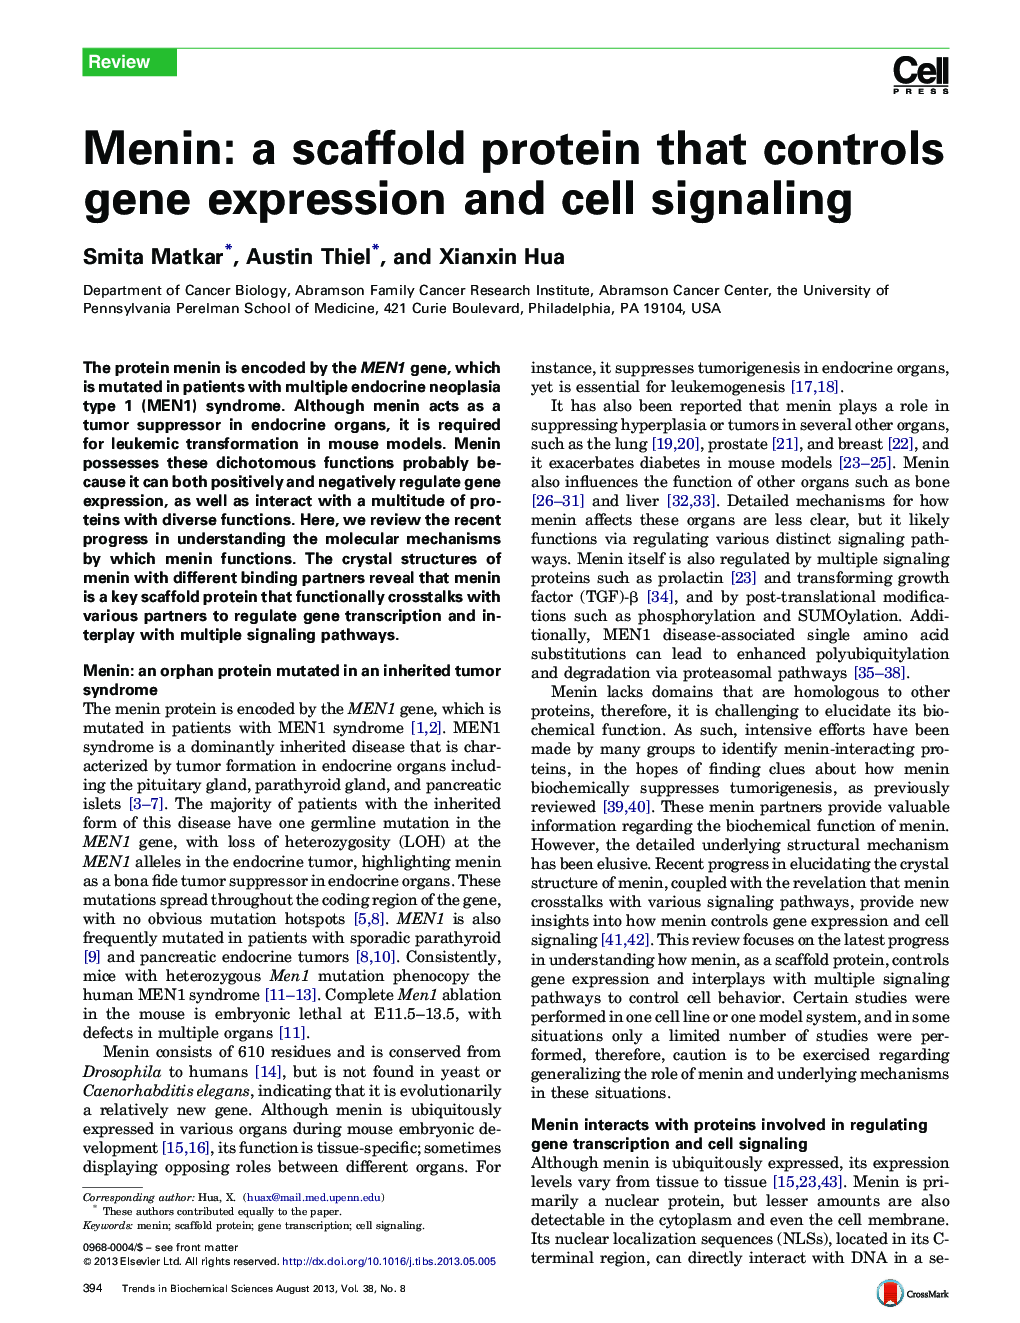 Menin: a scaffold protein that controls gene expression and cell signaling